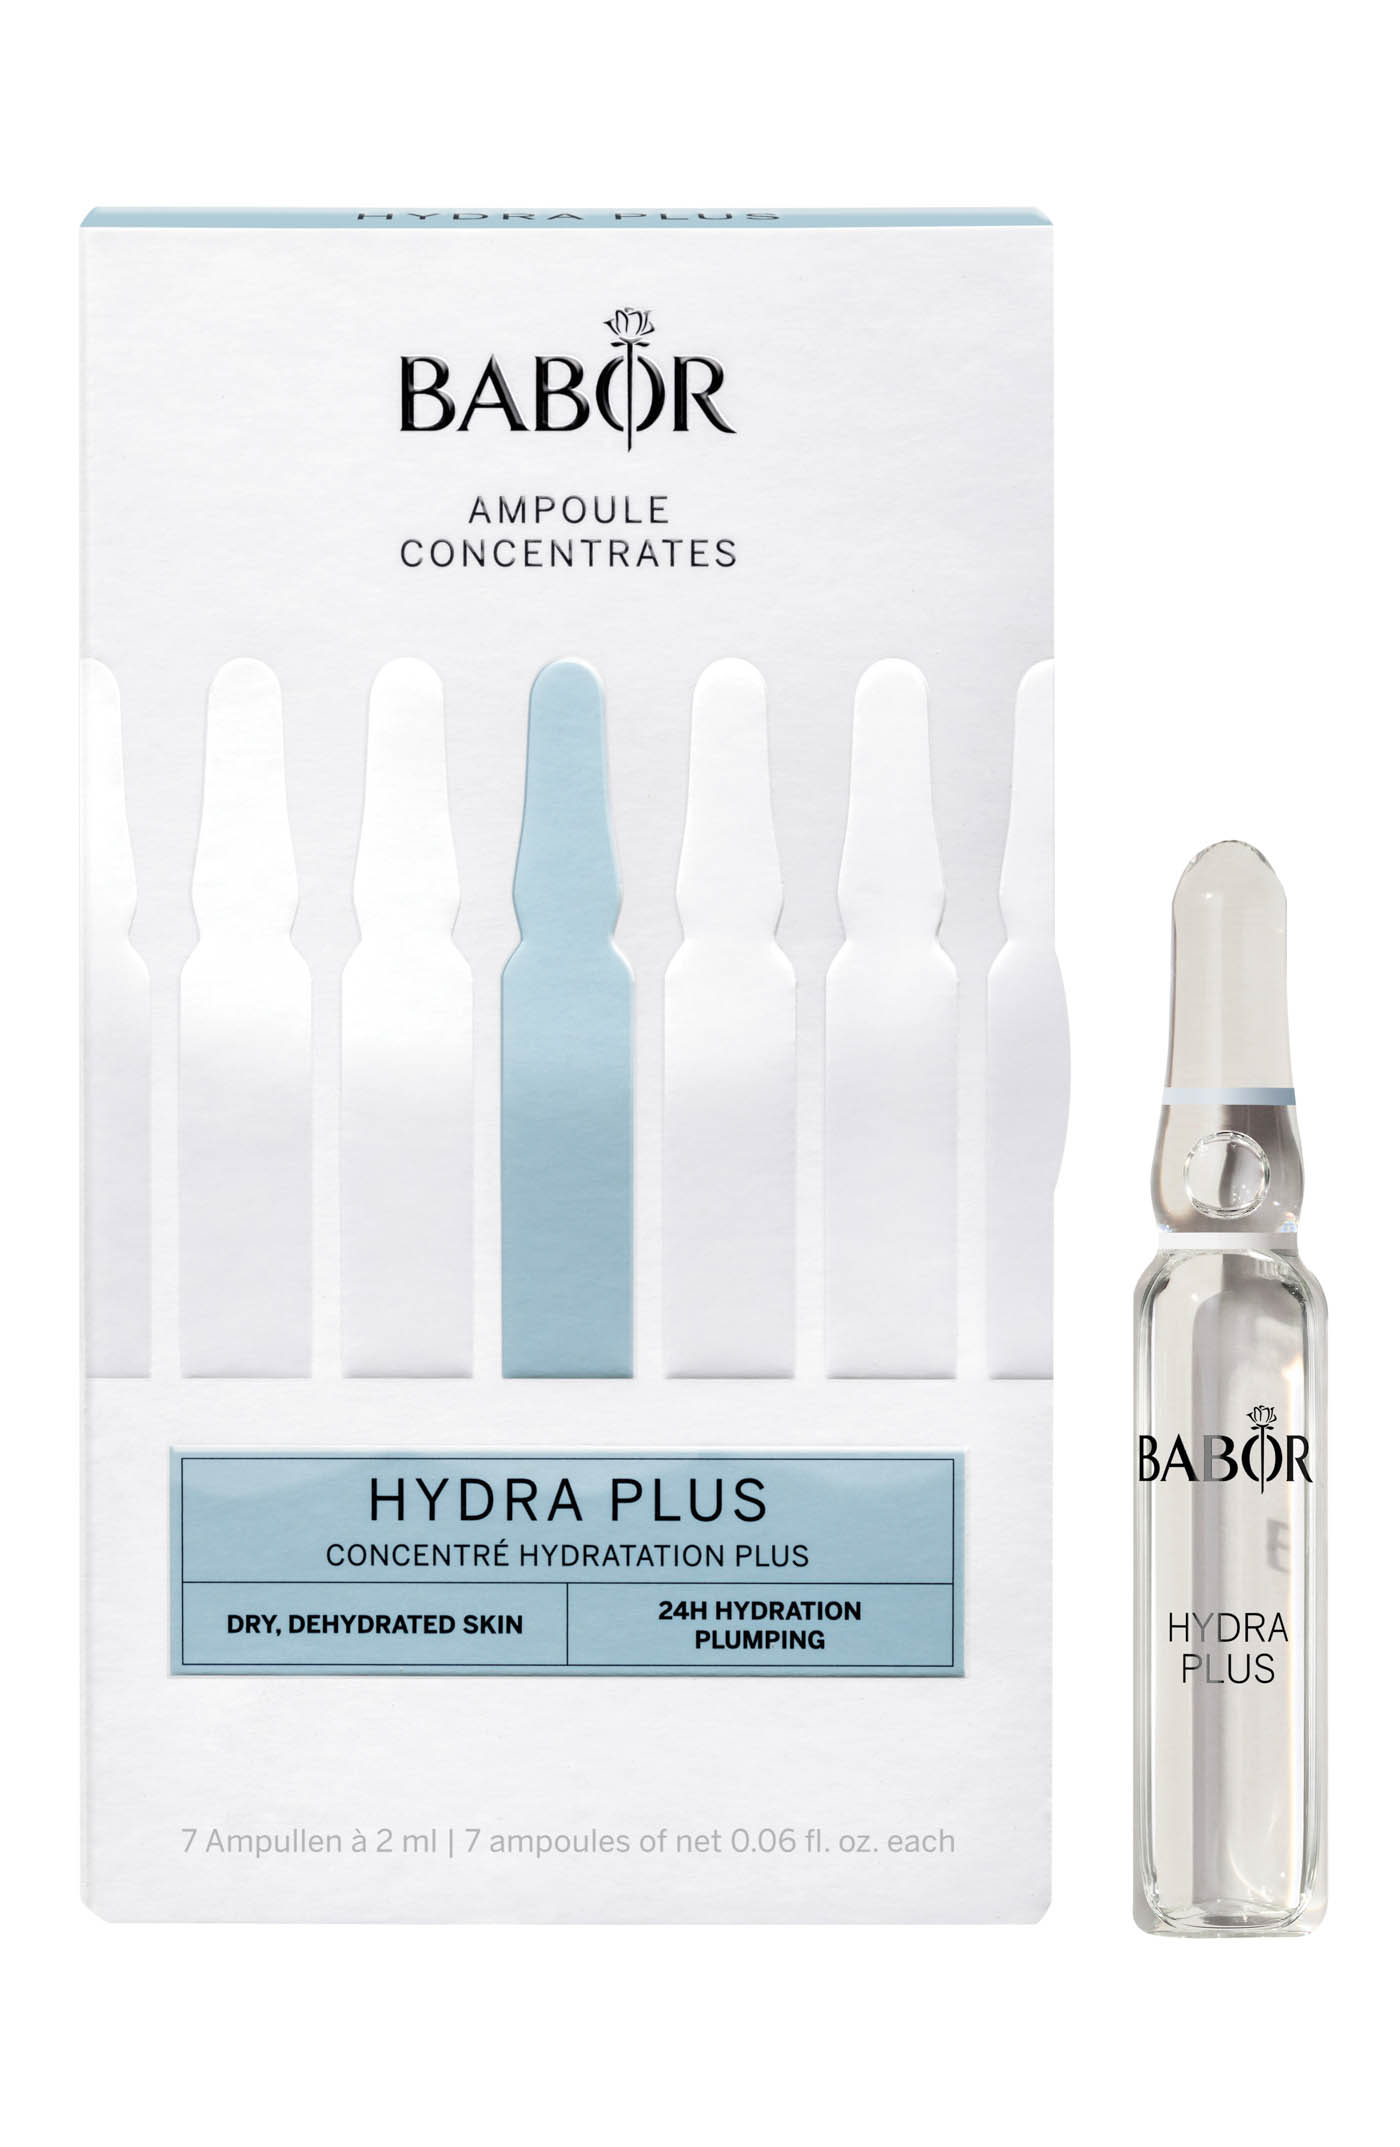 26 Babor, Hyra Plus Ampoule Concentrates, Nordstrom.com